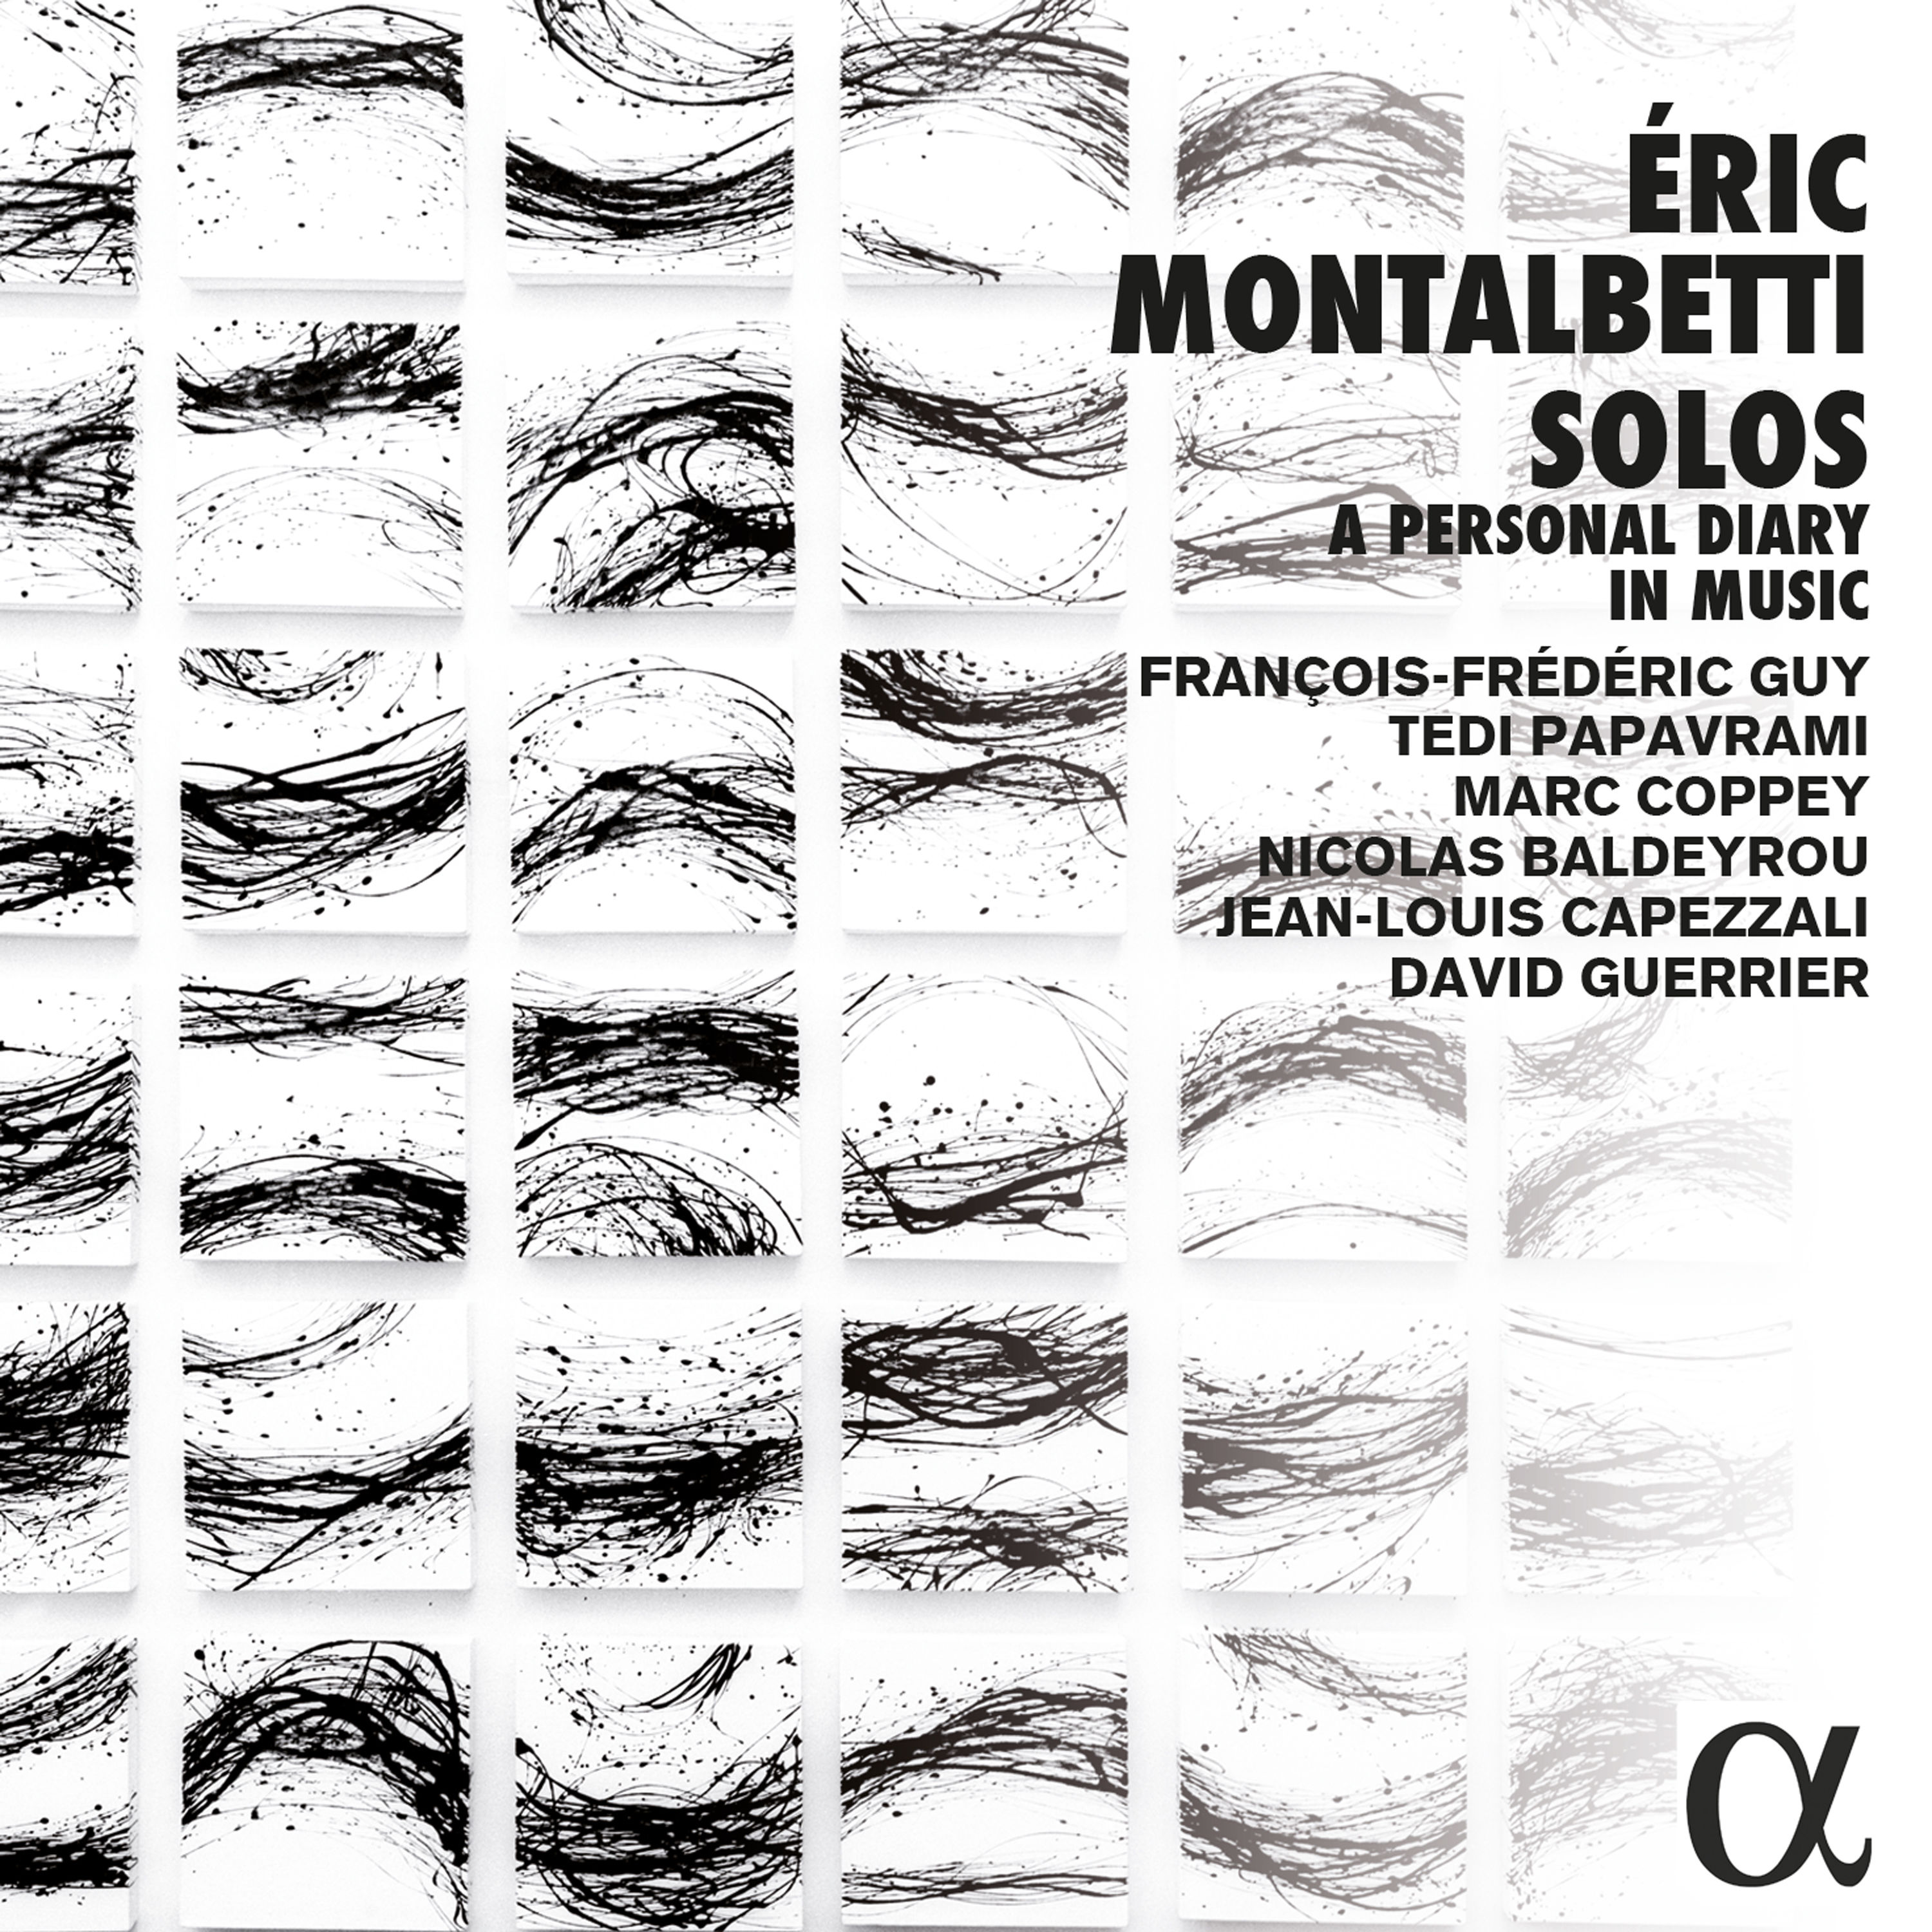 Francois-Frederic Guy - Montalbetti: Solos, a Personal Diary in Music (2016) [FLAC 24bit/48kHz]